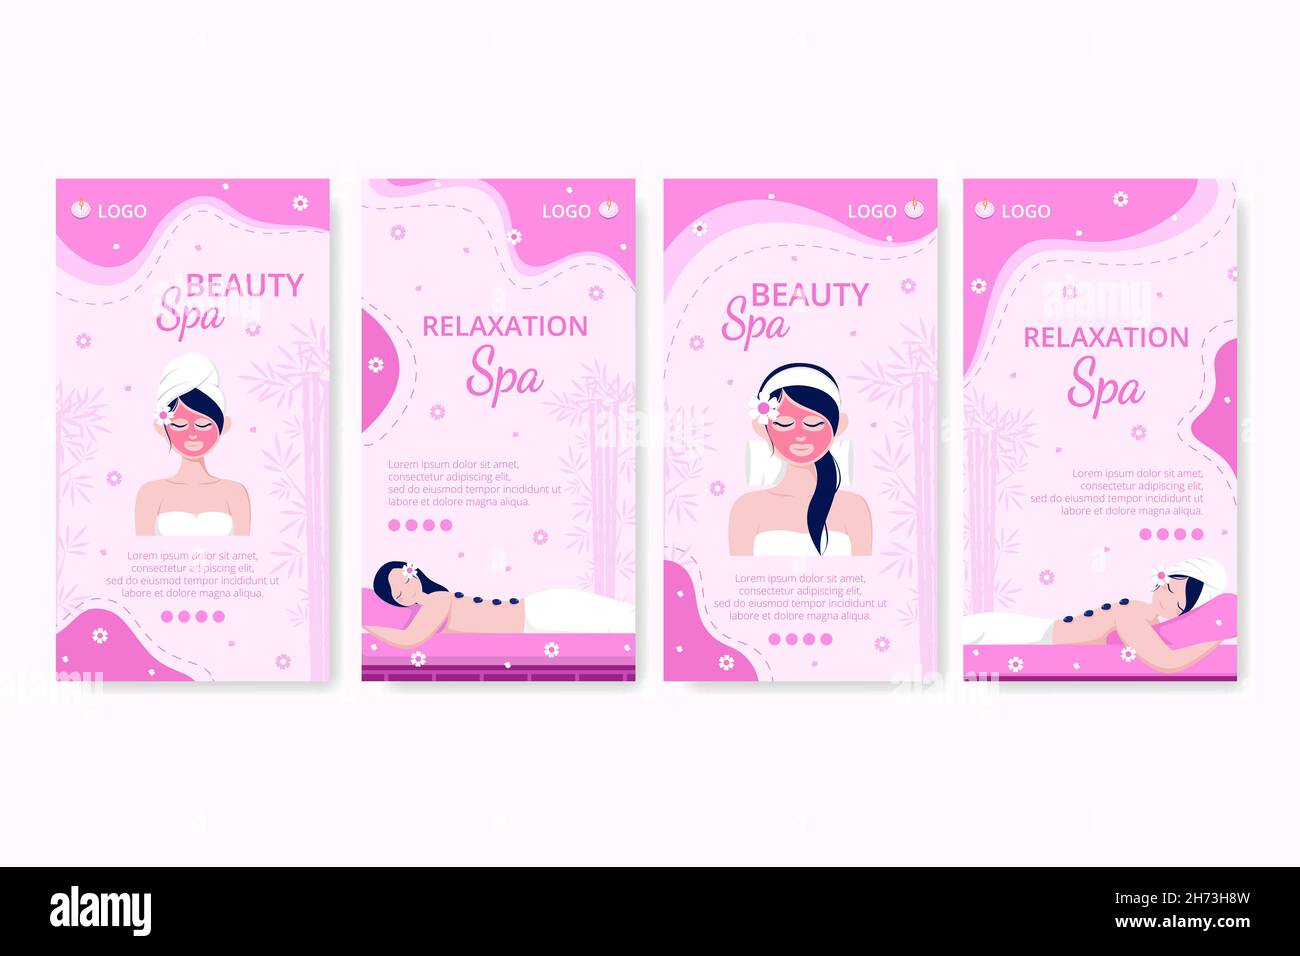 Beauty Spa and Yoga Stories Editable of Square Background Suitable for Social Media, Feed, Card, Greetings, Print and Web Internet Ads Stock Vector